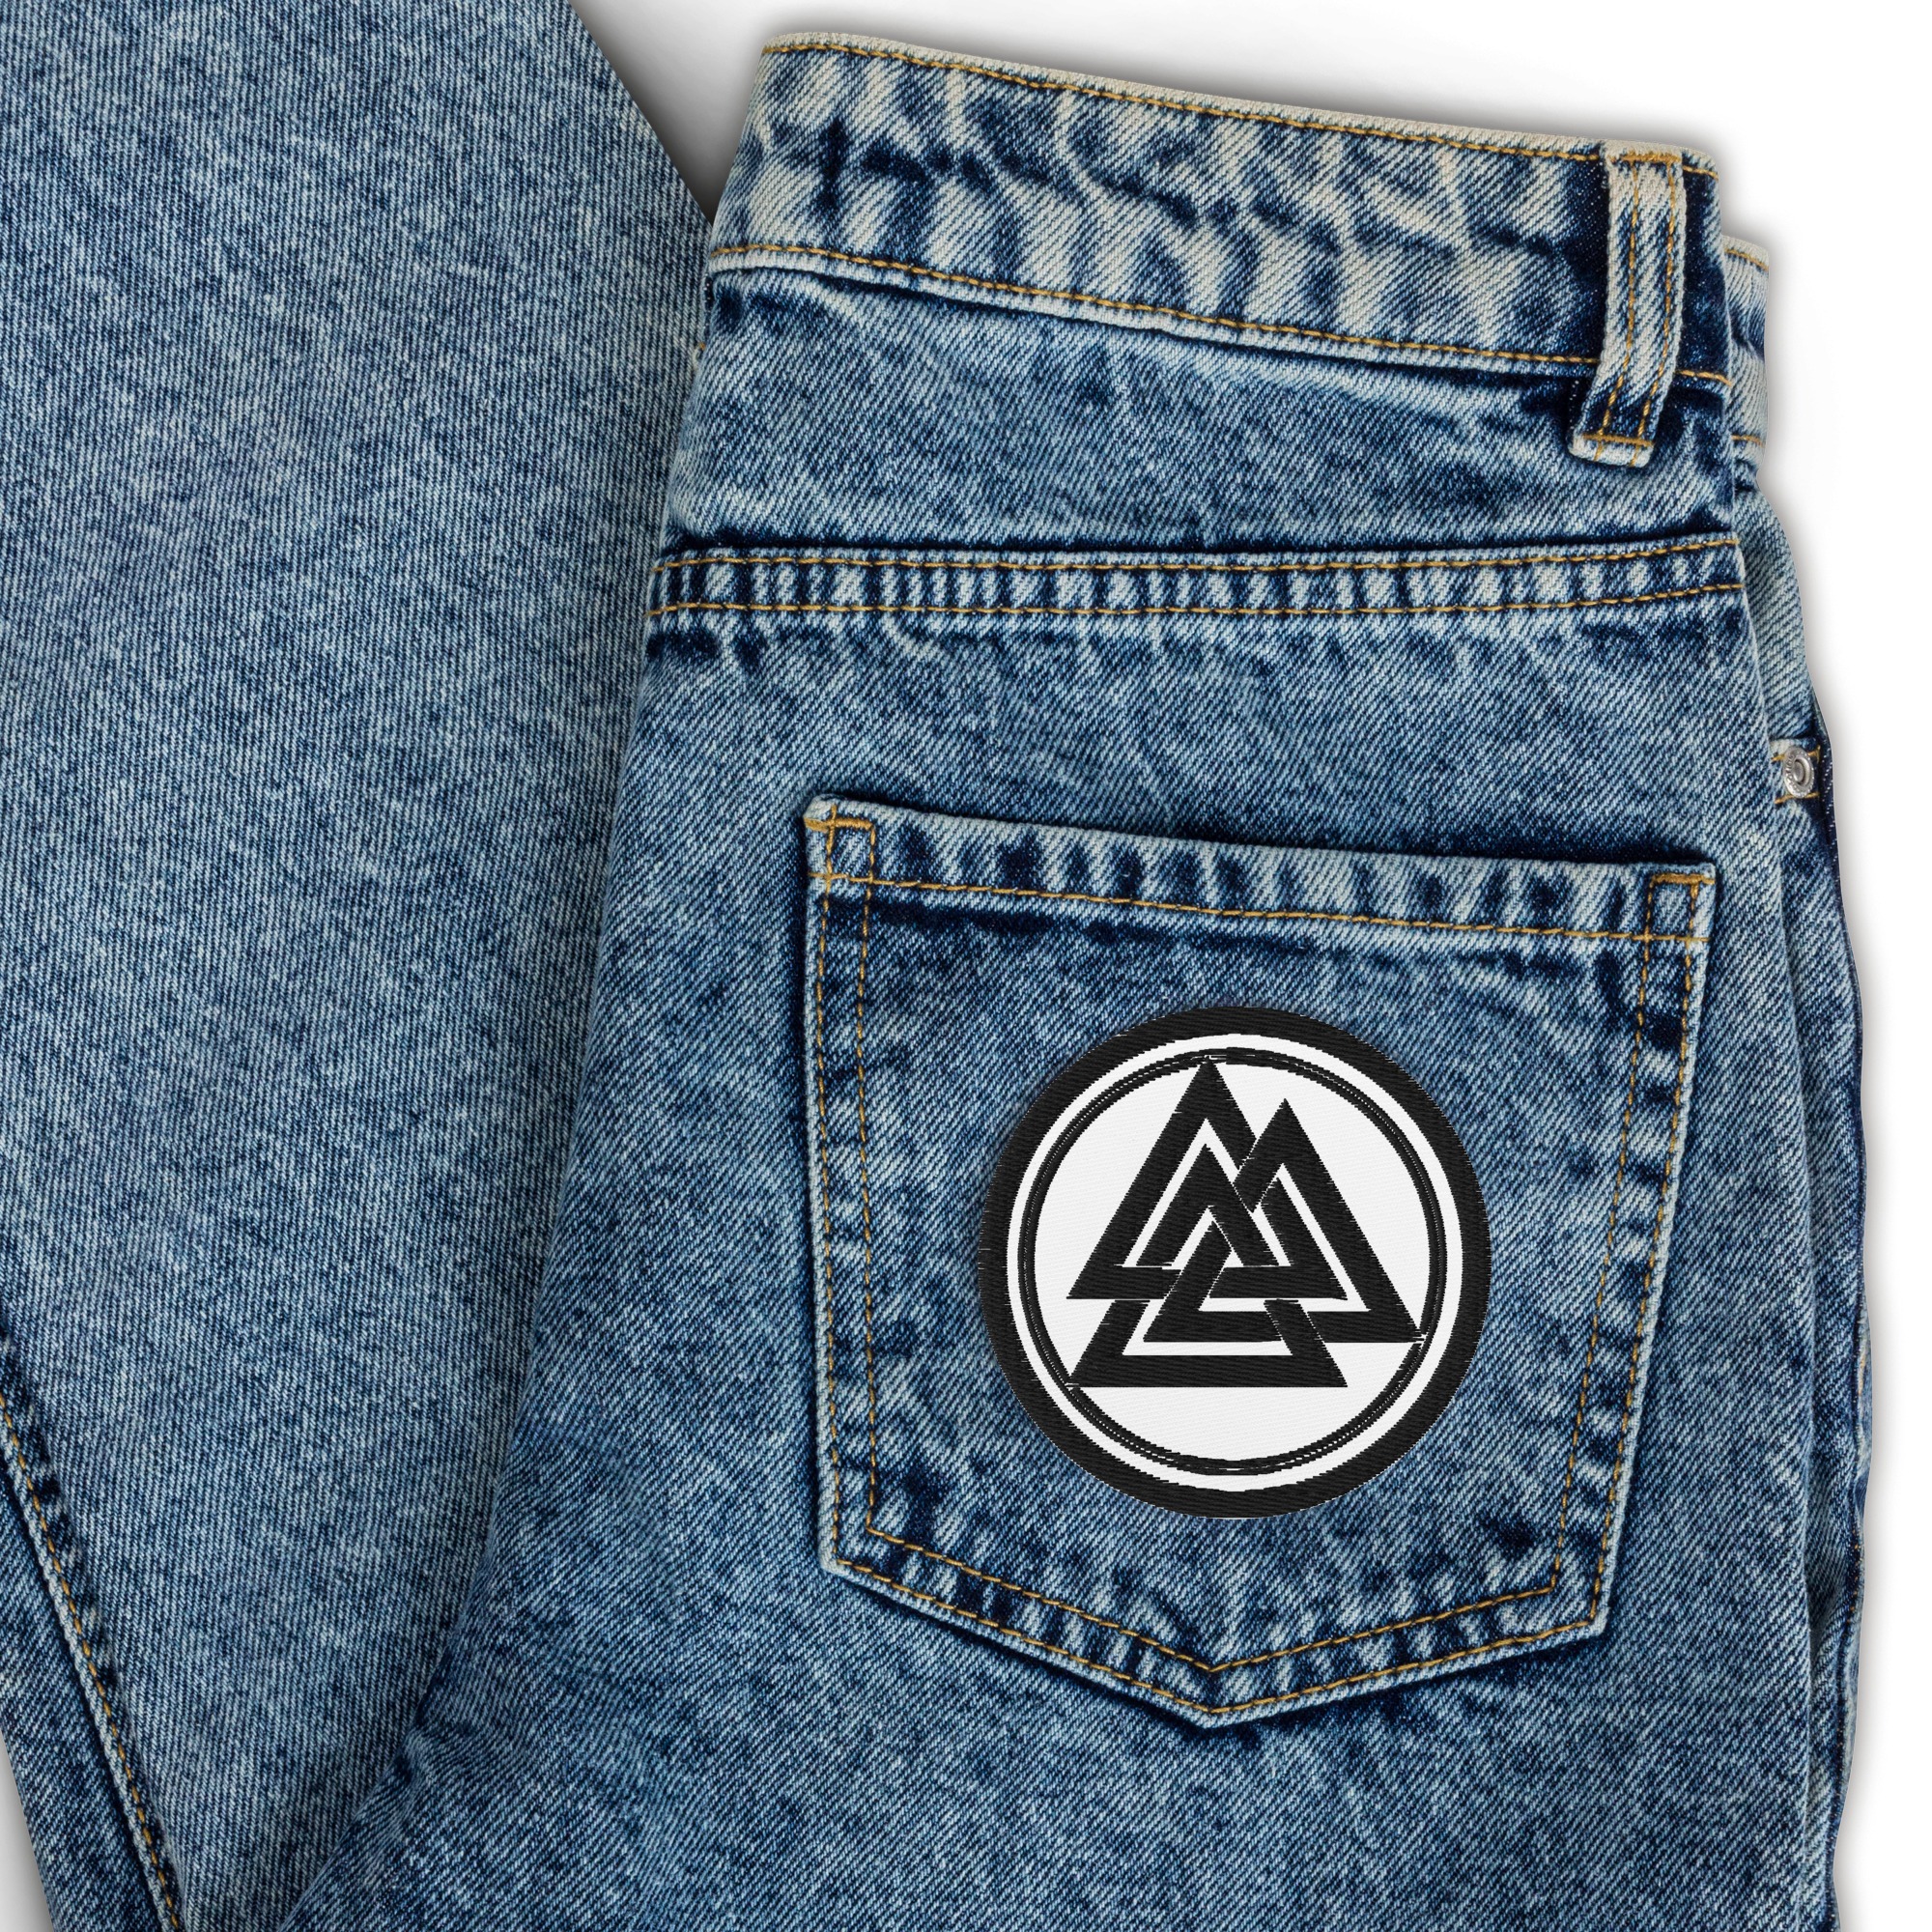 Black & White Valknut Embroidered Patch